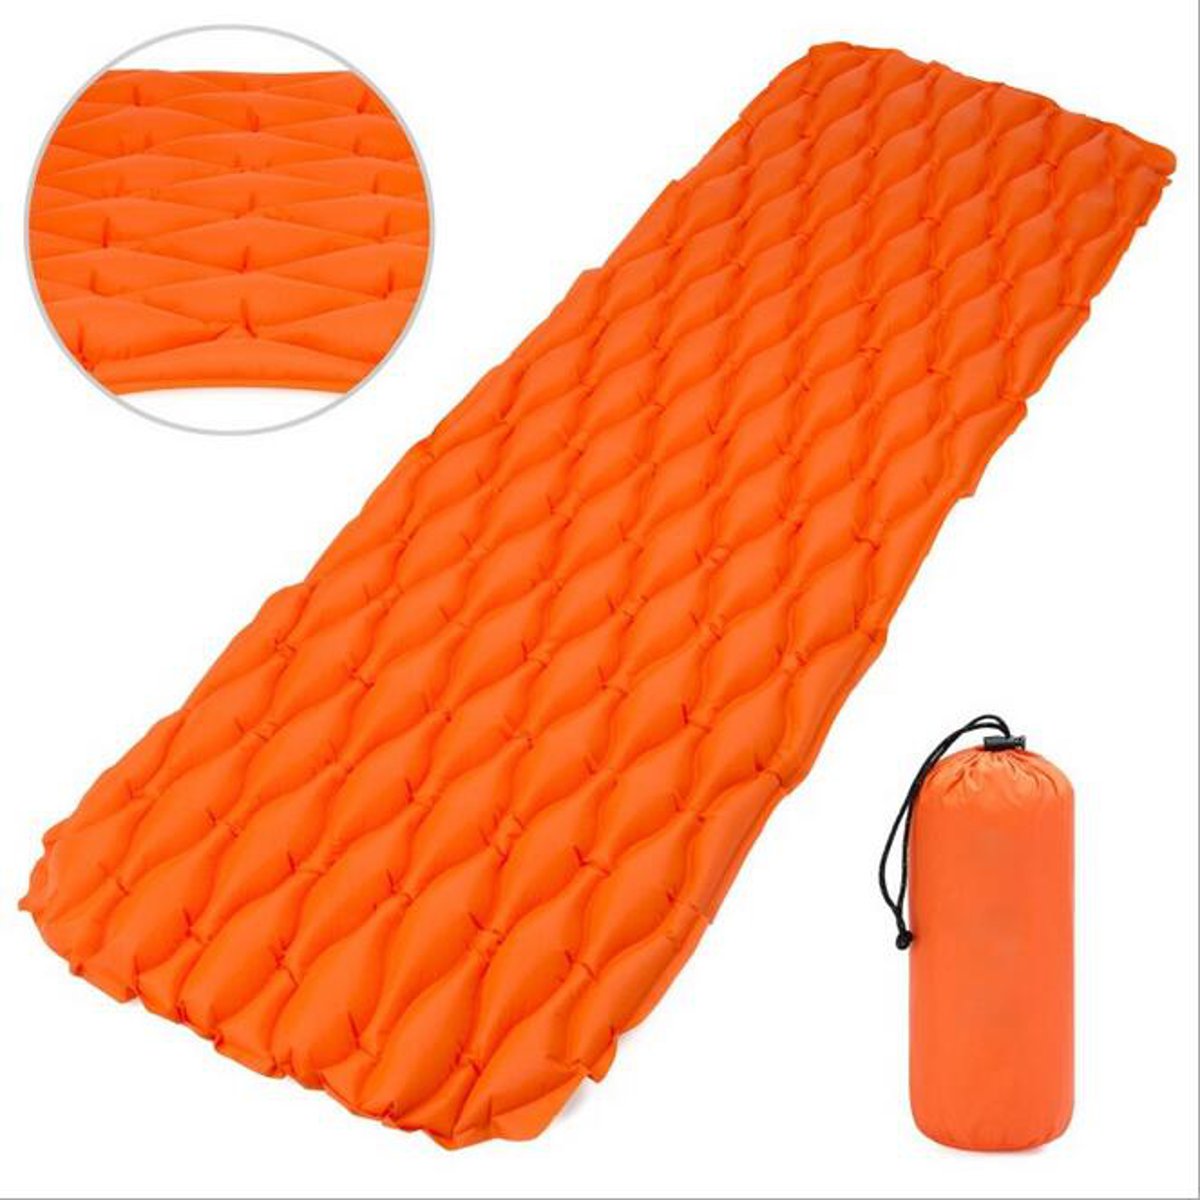 Meigar Portable Inflatable Sleeping Pad Compact Camping Backpacking Air Pad Lightweight Sleeping Mat Portable Hiking Mattress - image 1 of 6